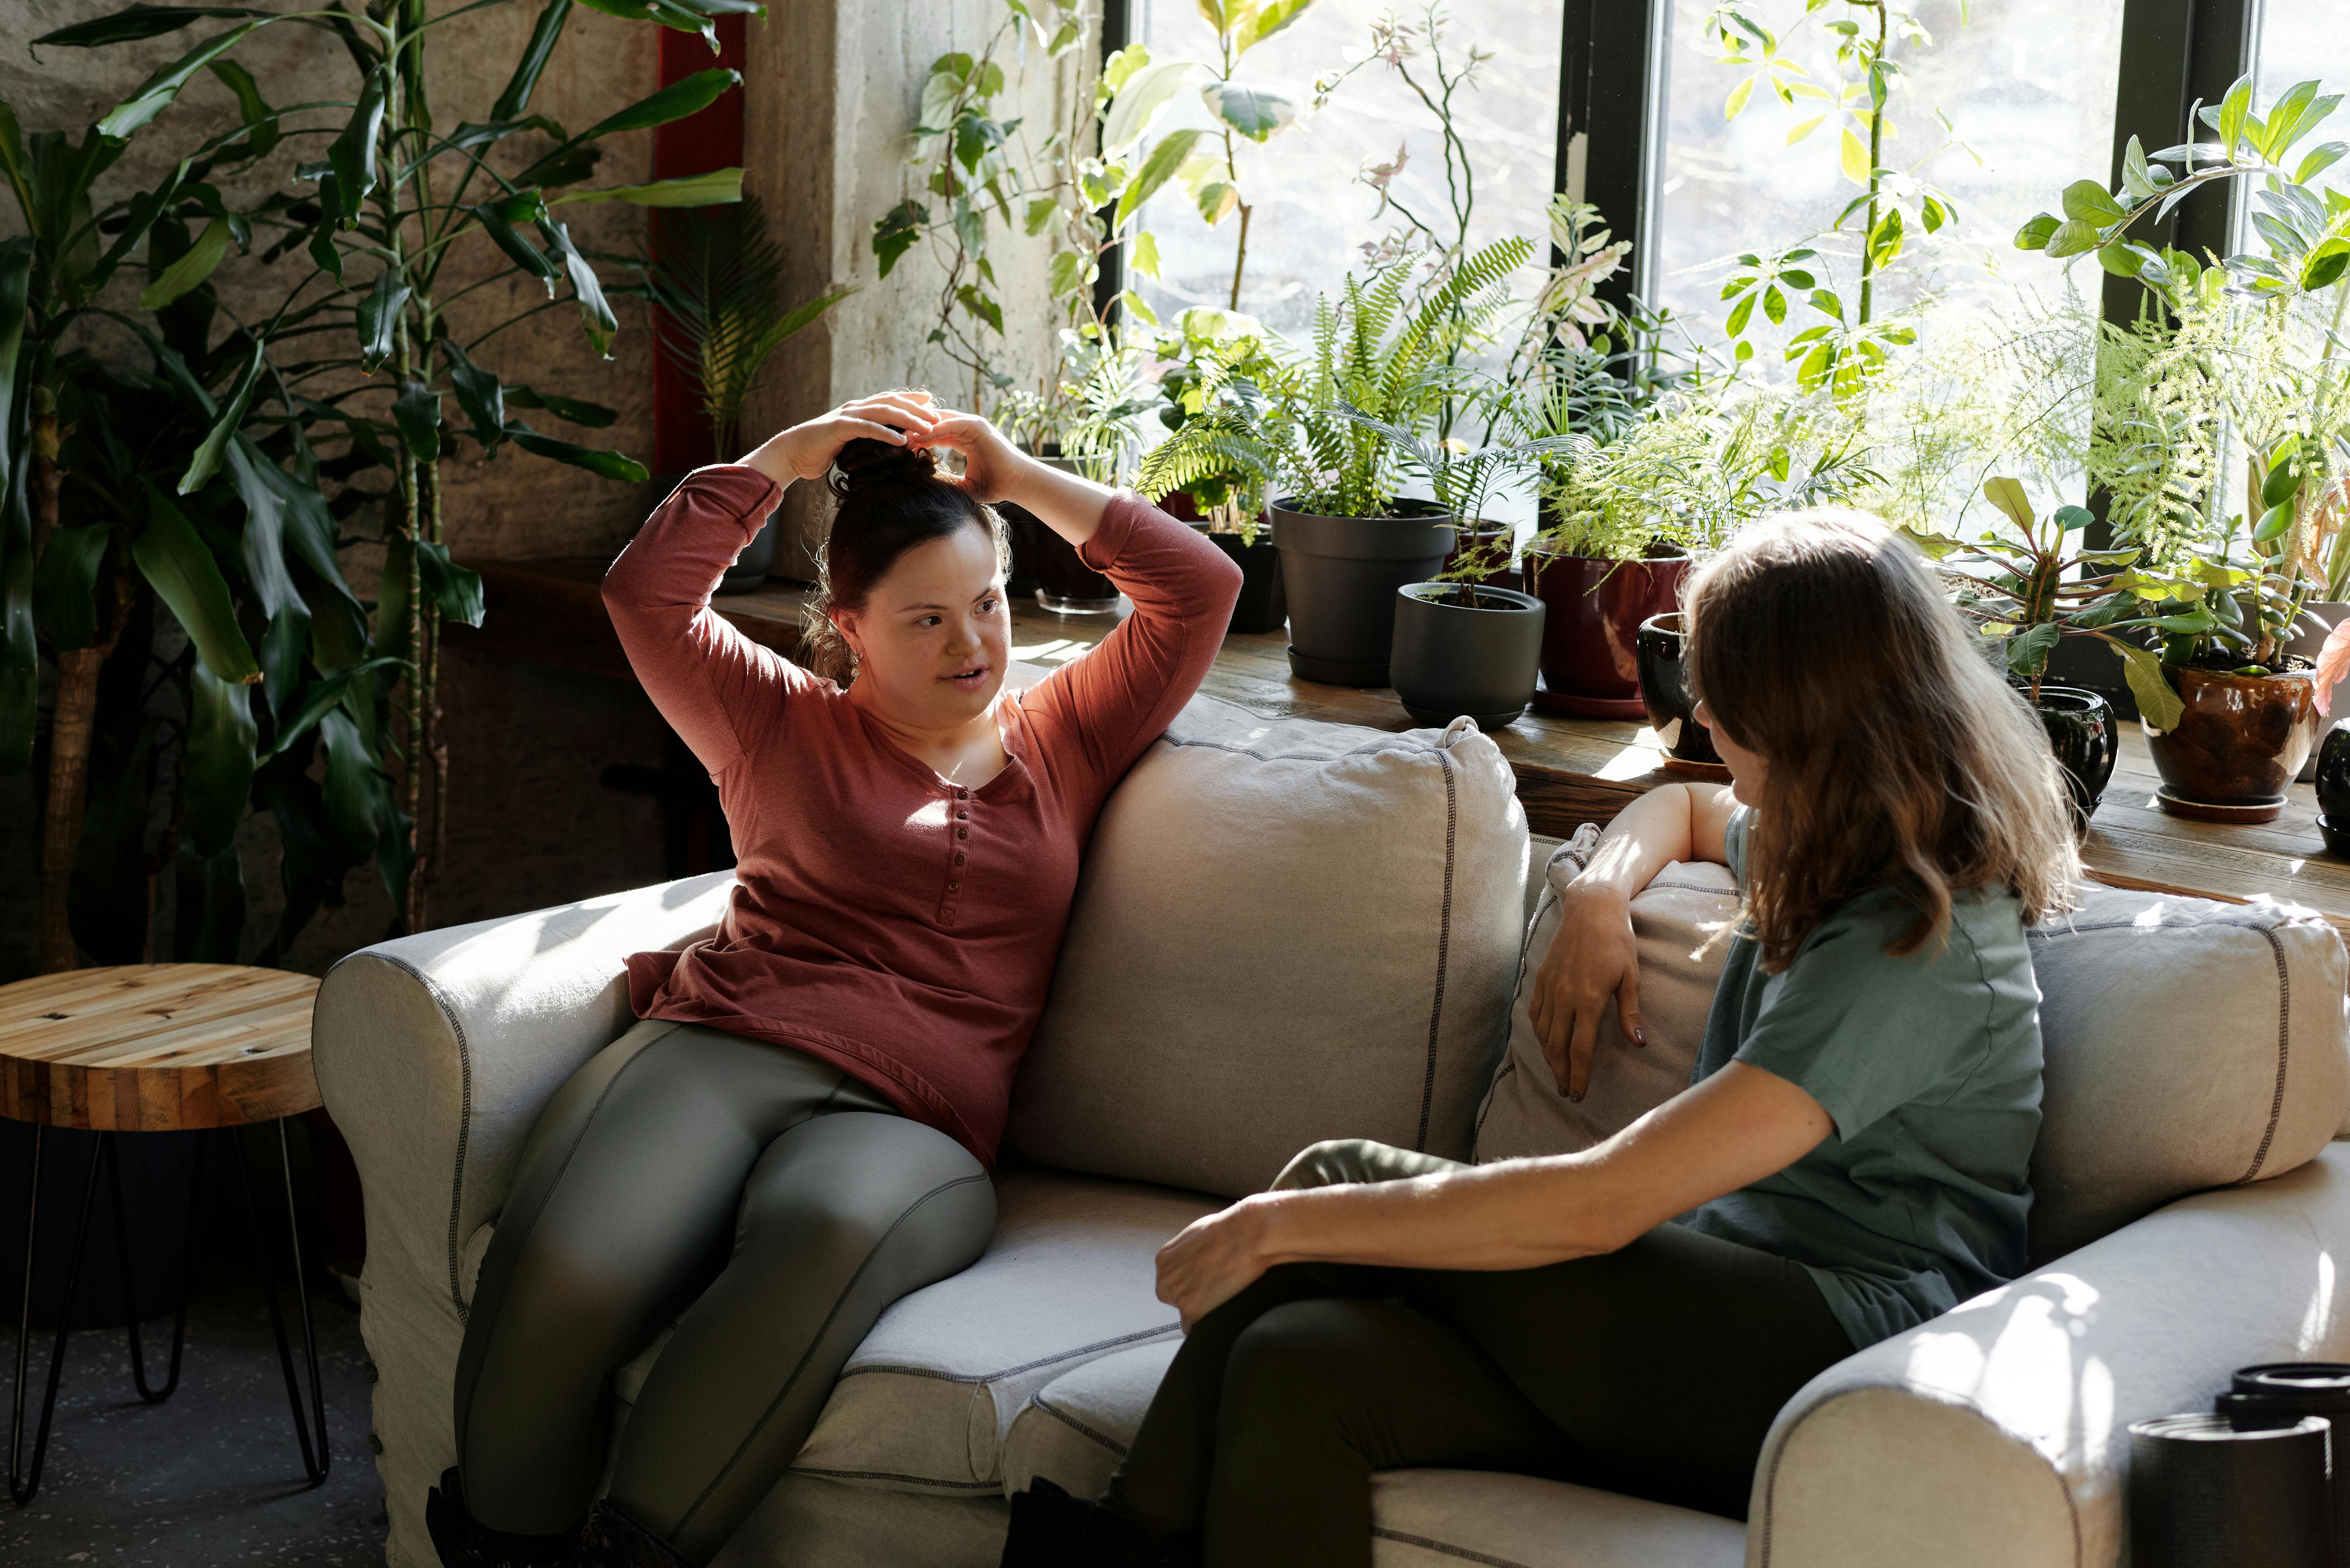 Women Sitting on the Couch Chatting · Free Stock Photo